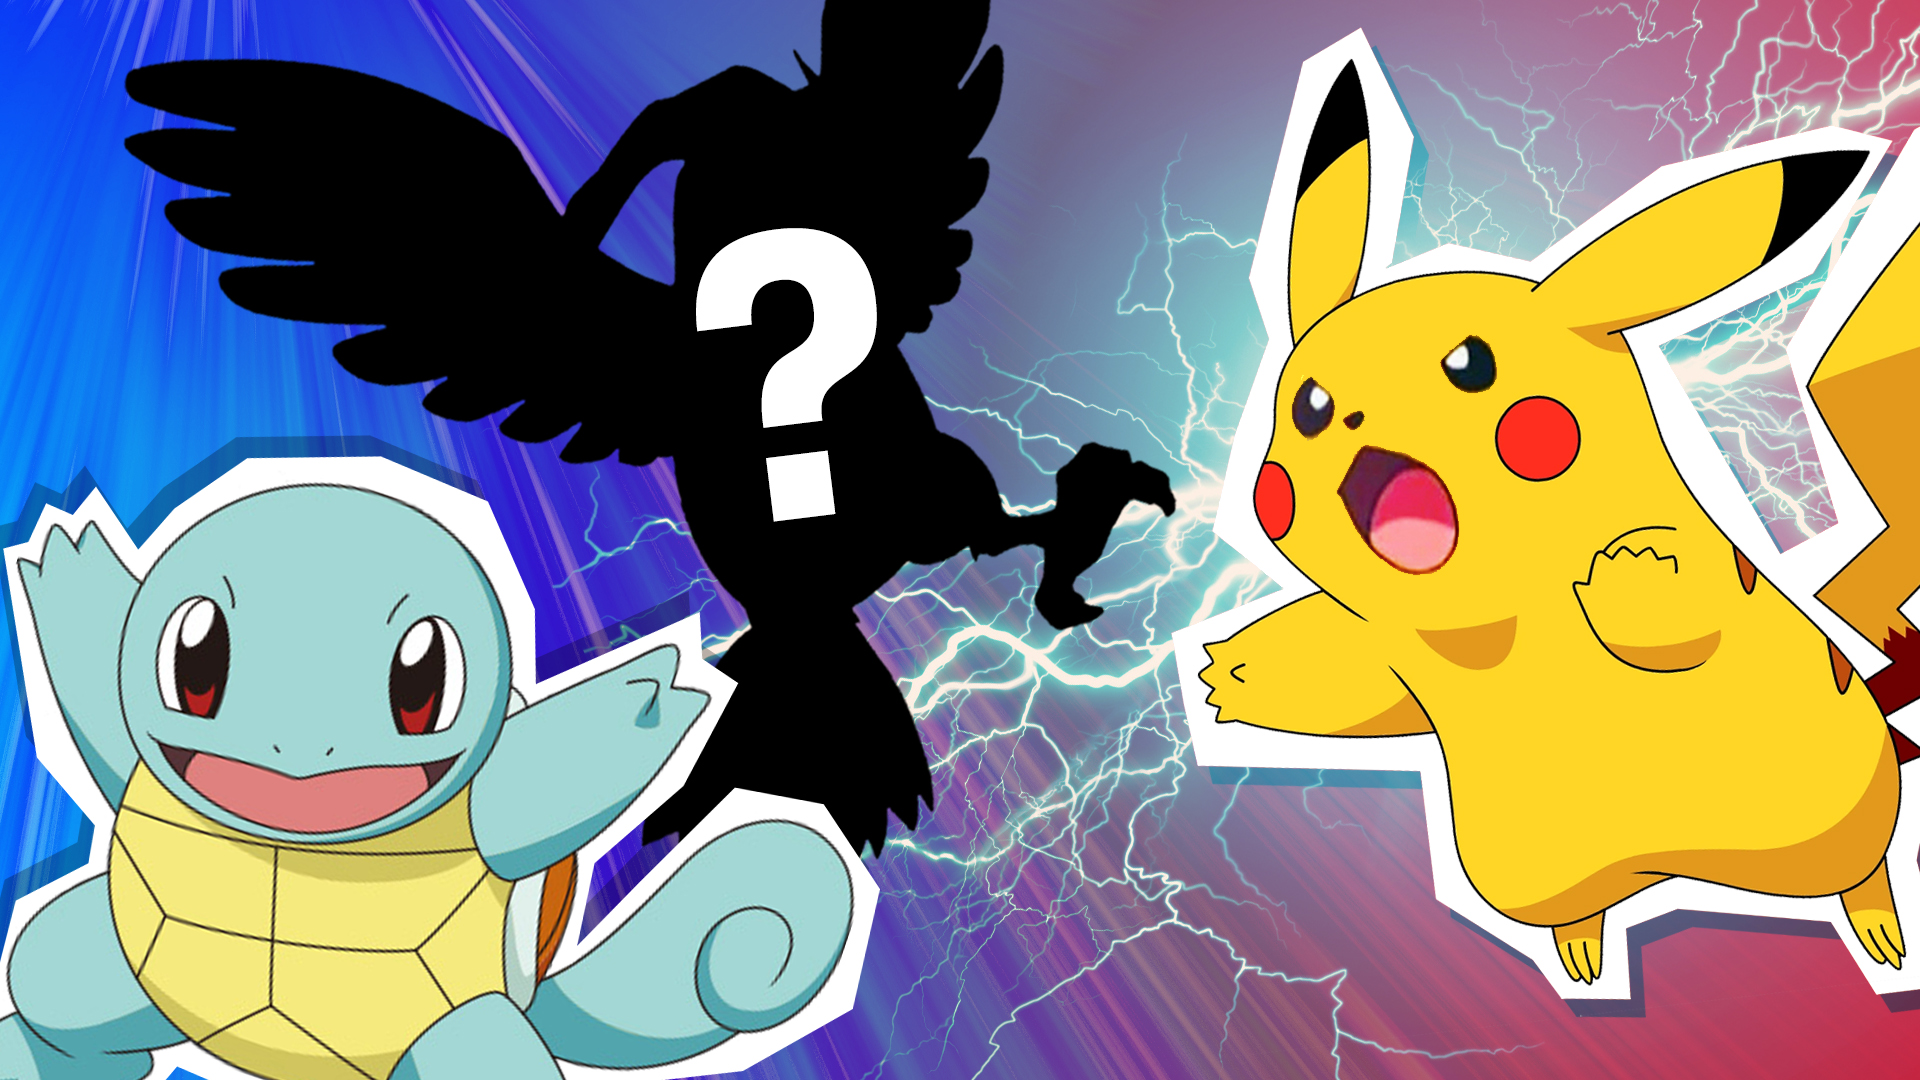 Squirtle, Pikachu and who's that pokemon?